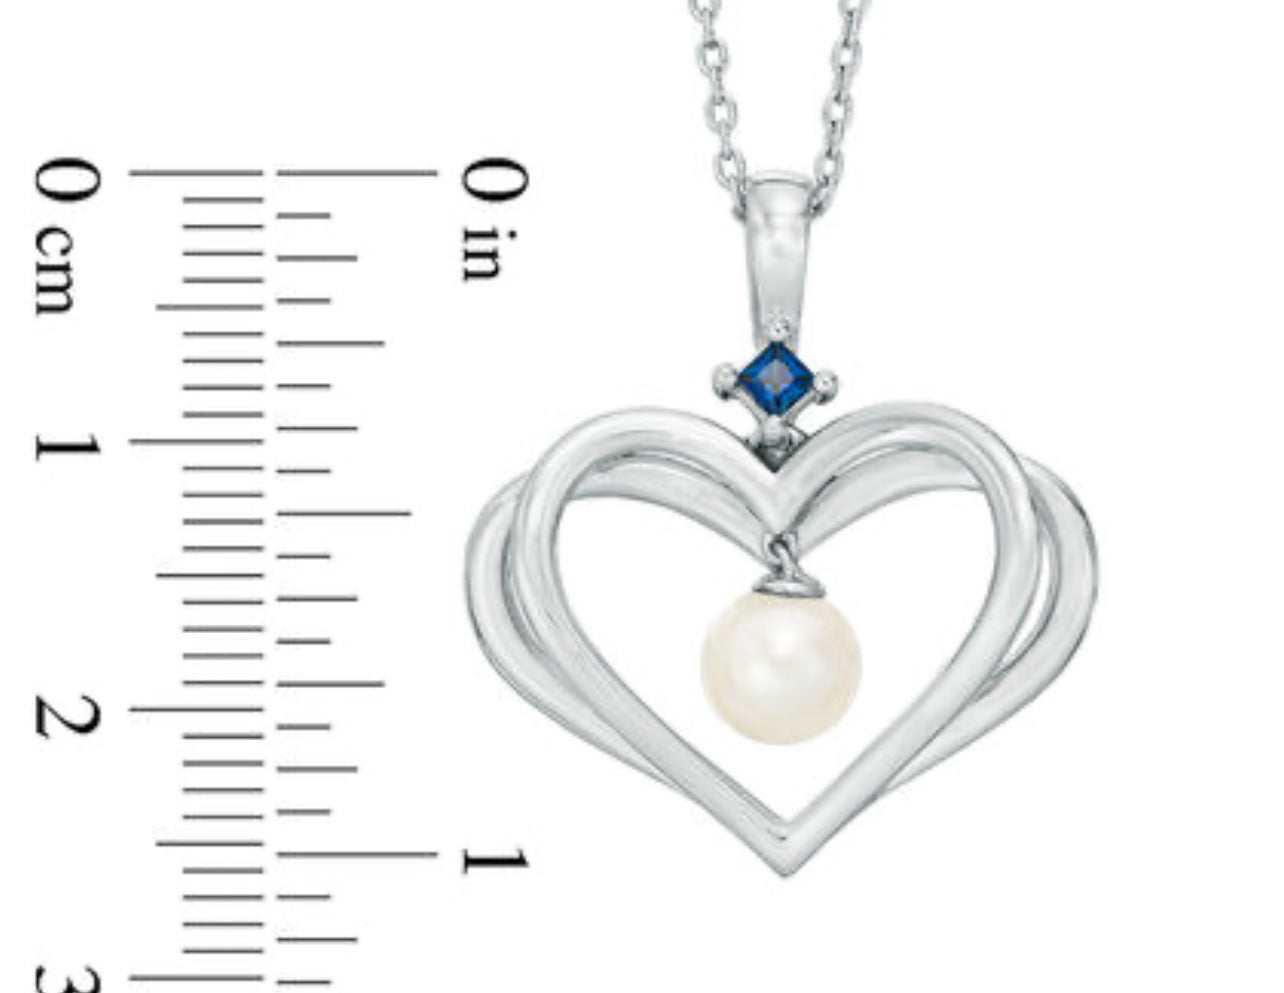 The Kindred Heart from Vera Wang Love Collection Cultured Freshwater Pearl and Sapphire Pendant in Sterling Silver - 19"